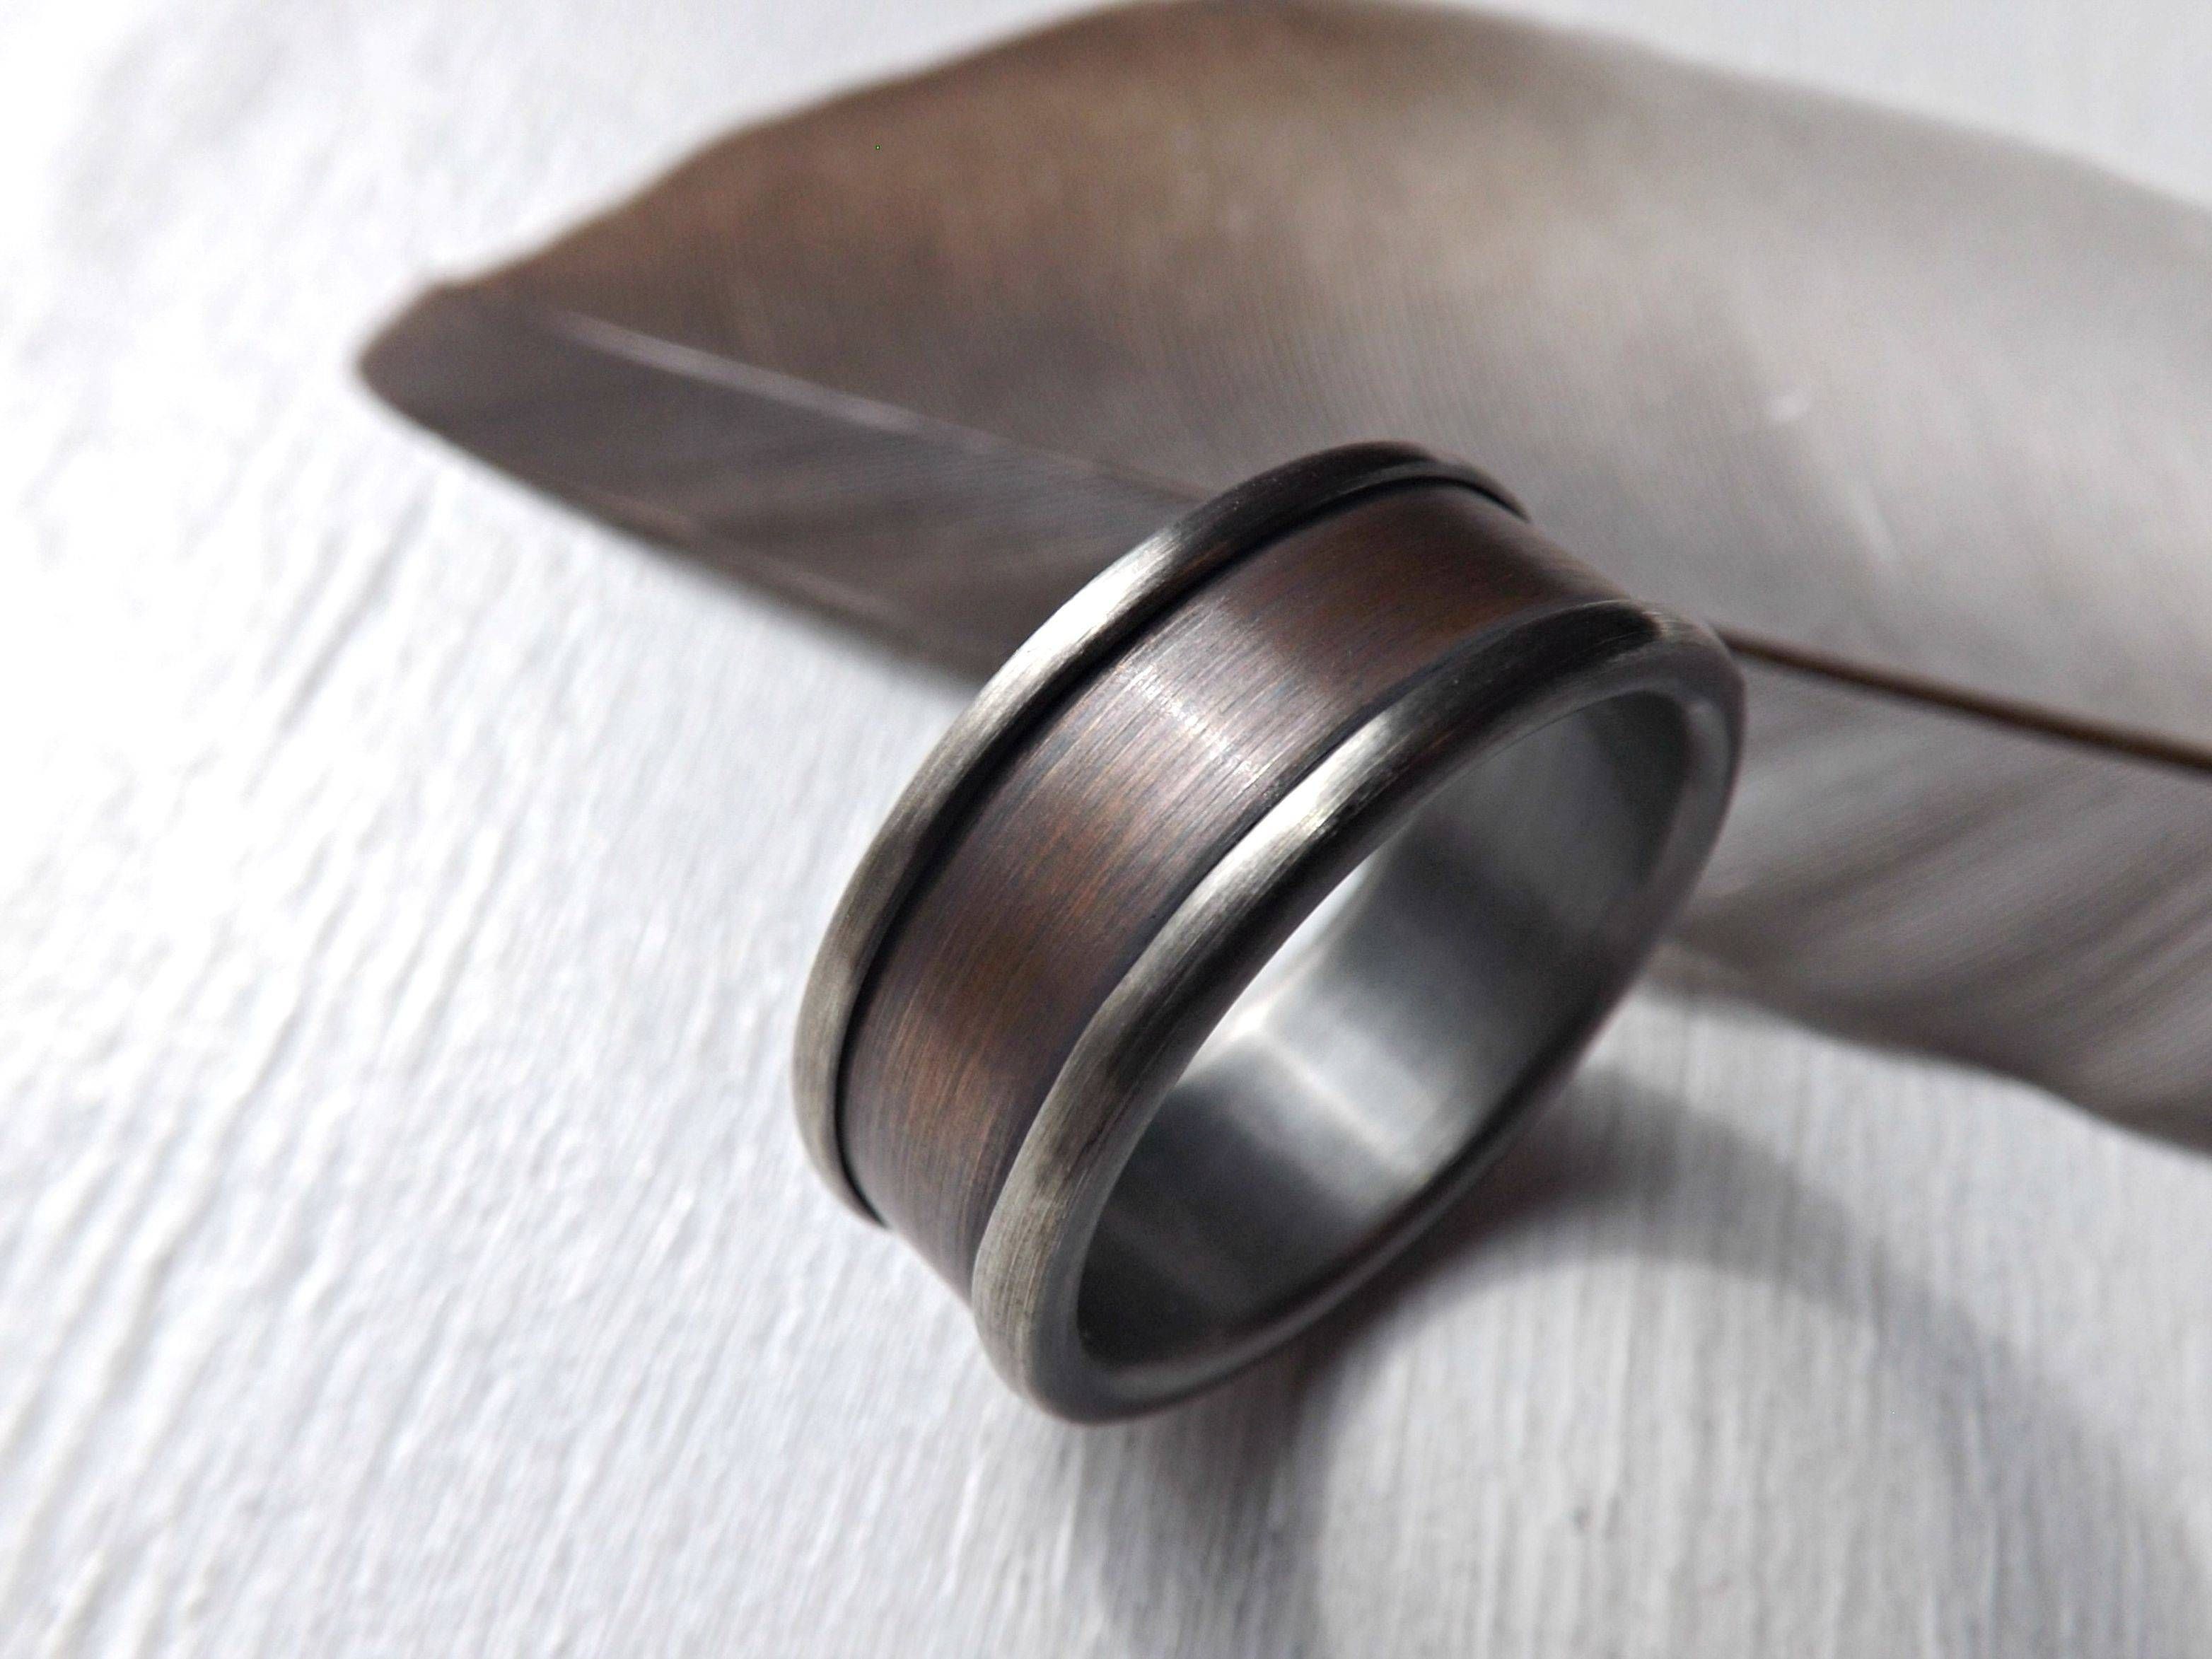 Buy A Hand Made Silver Bronze Ring For Men, Unique Mens Wedding Throughout Unique Men Wedding Bands (View 12 of 15)